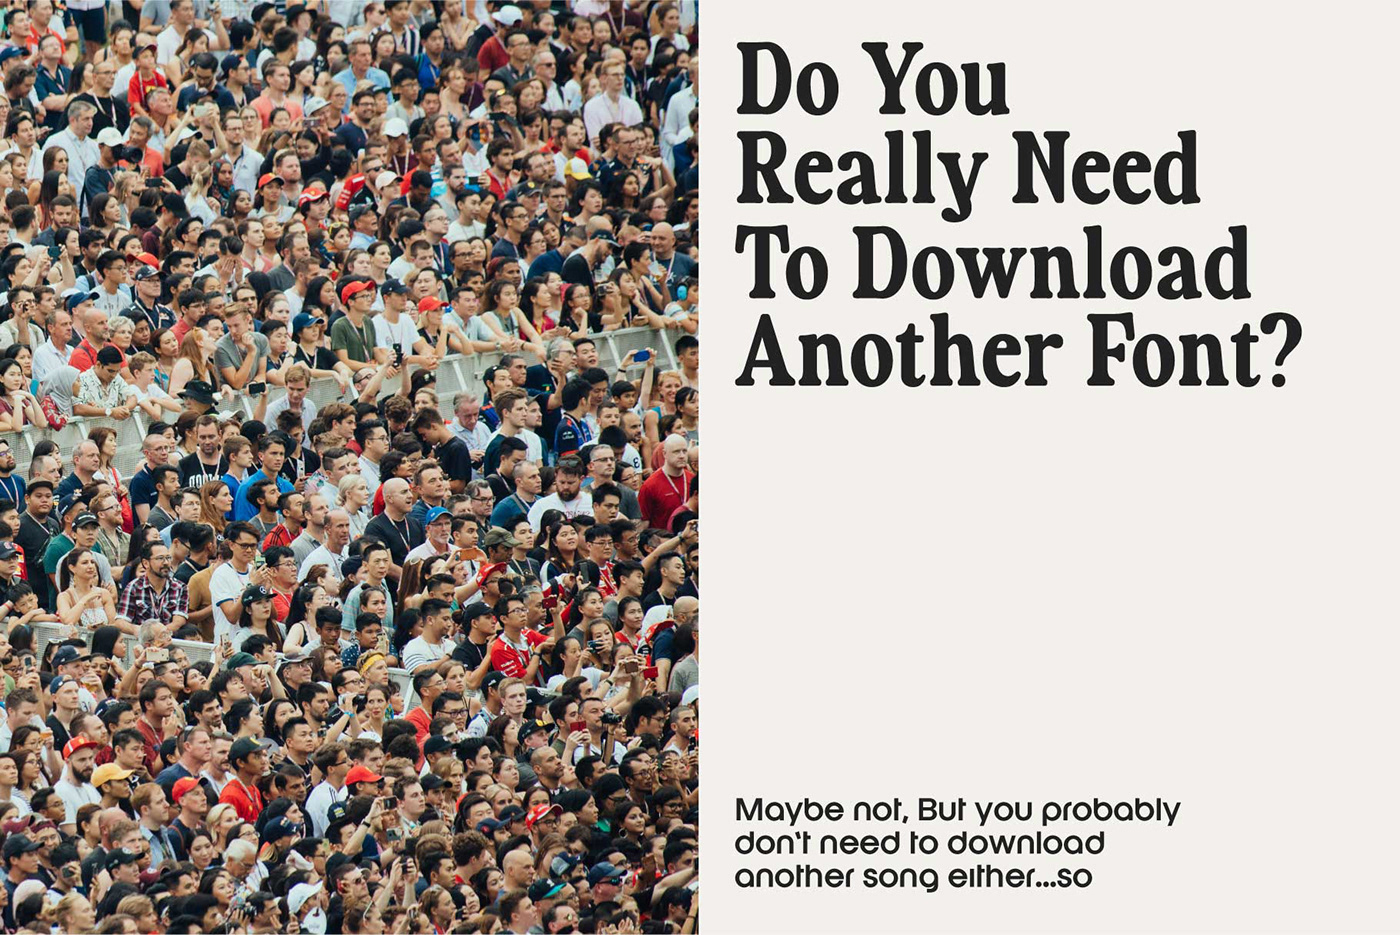 a crowd asking is you need to download another font